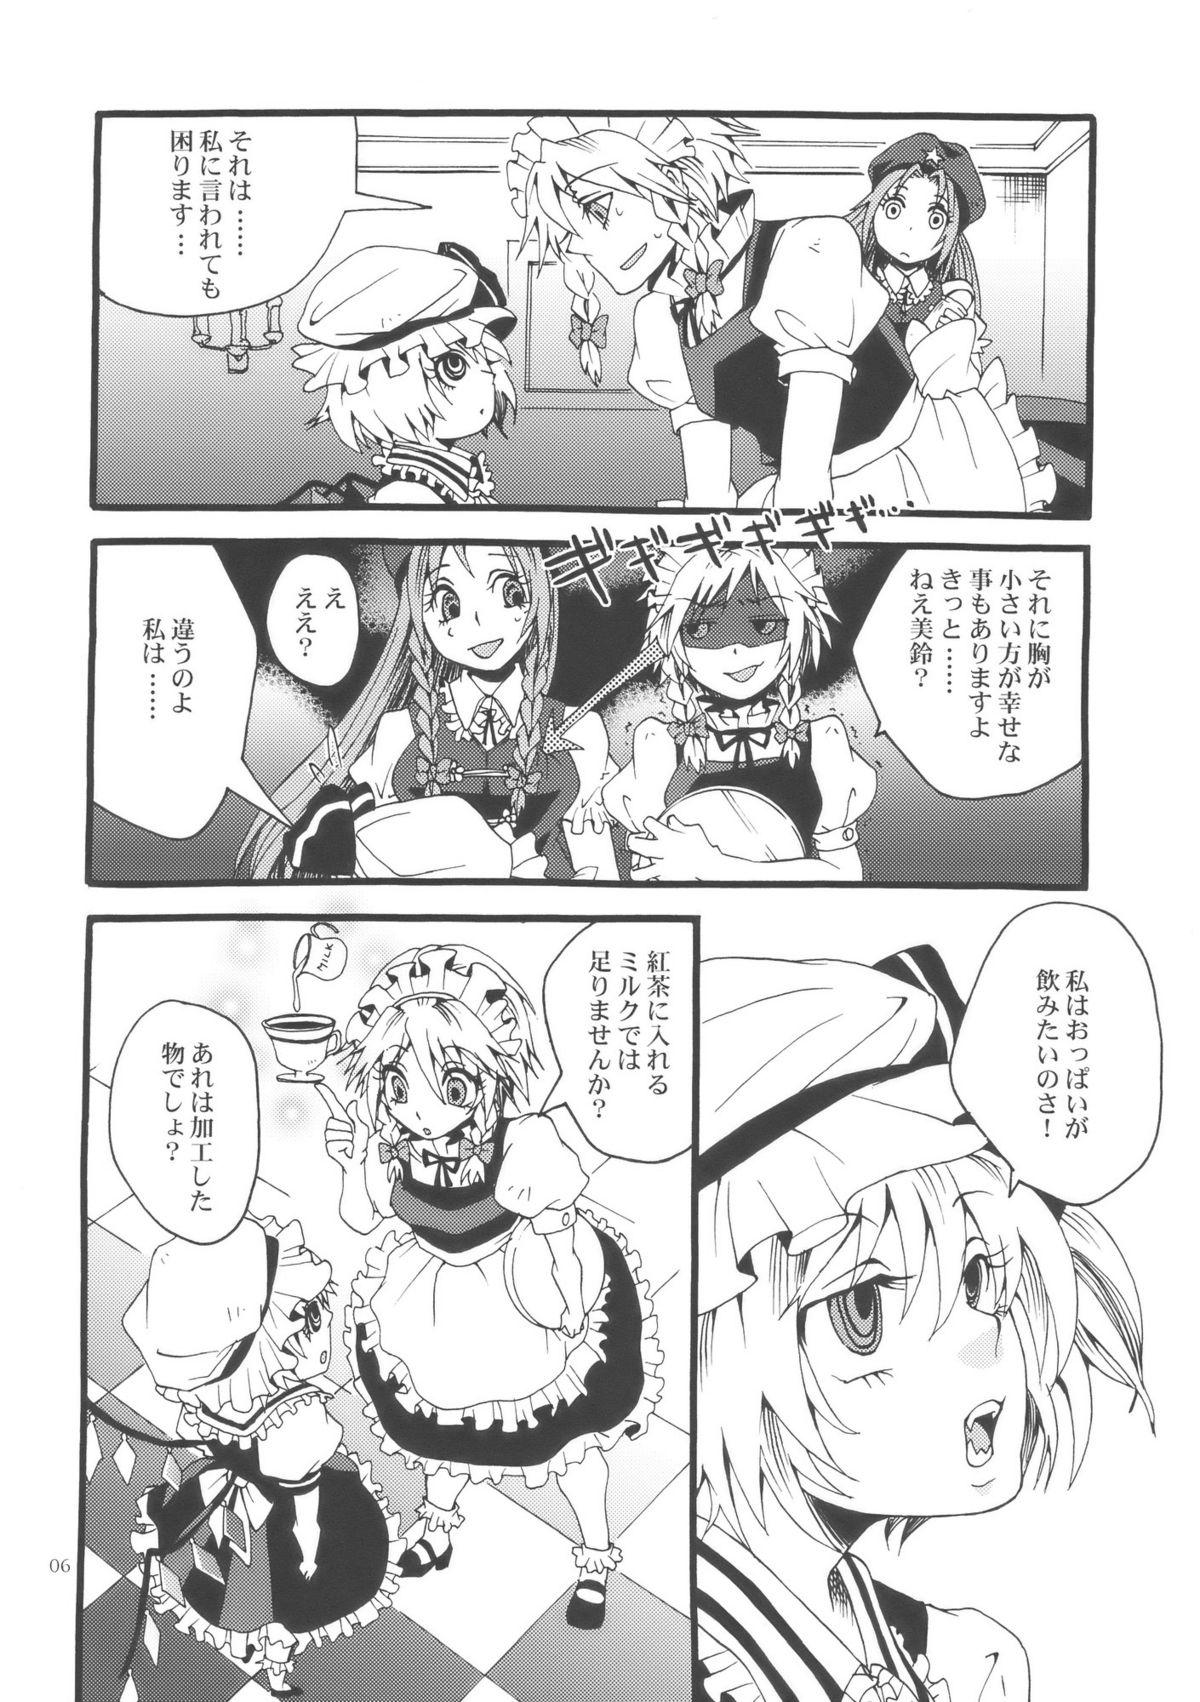 Puto Bloody White - Touhou project Stripping - Page 6